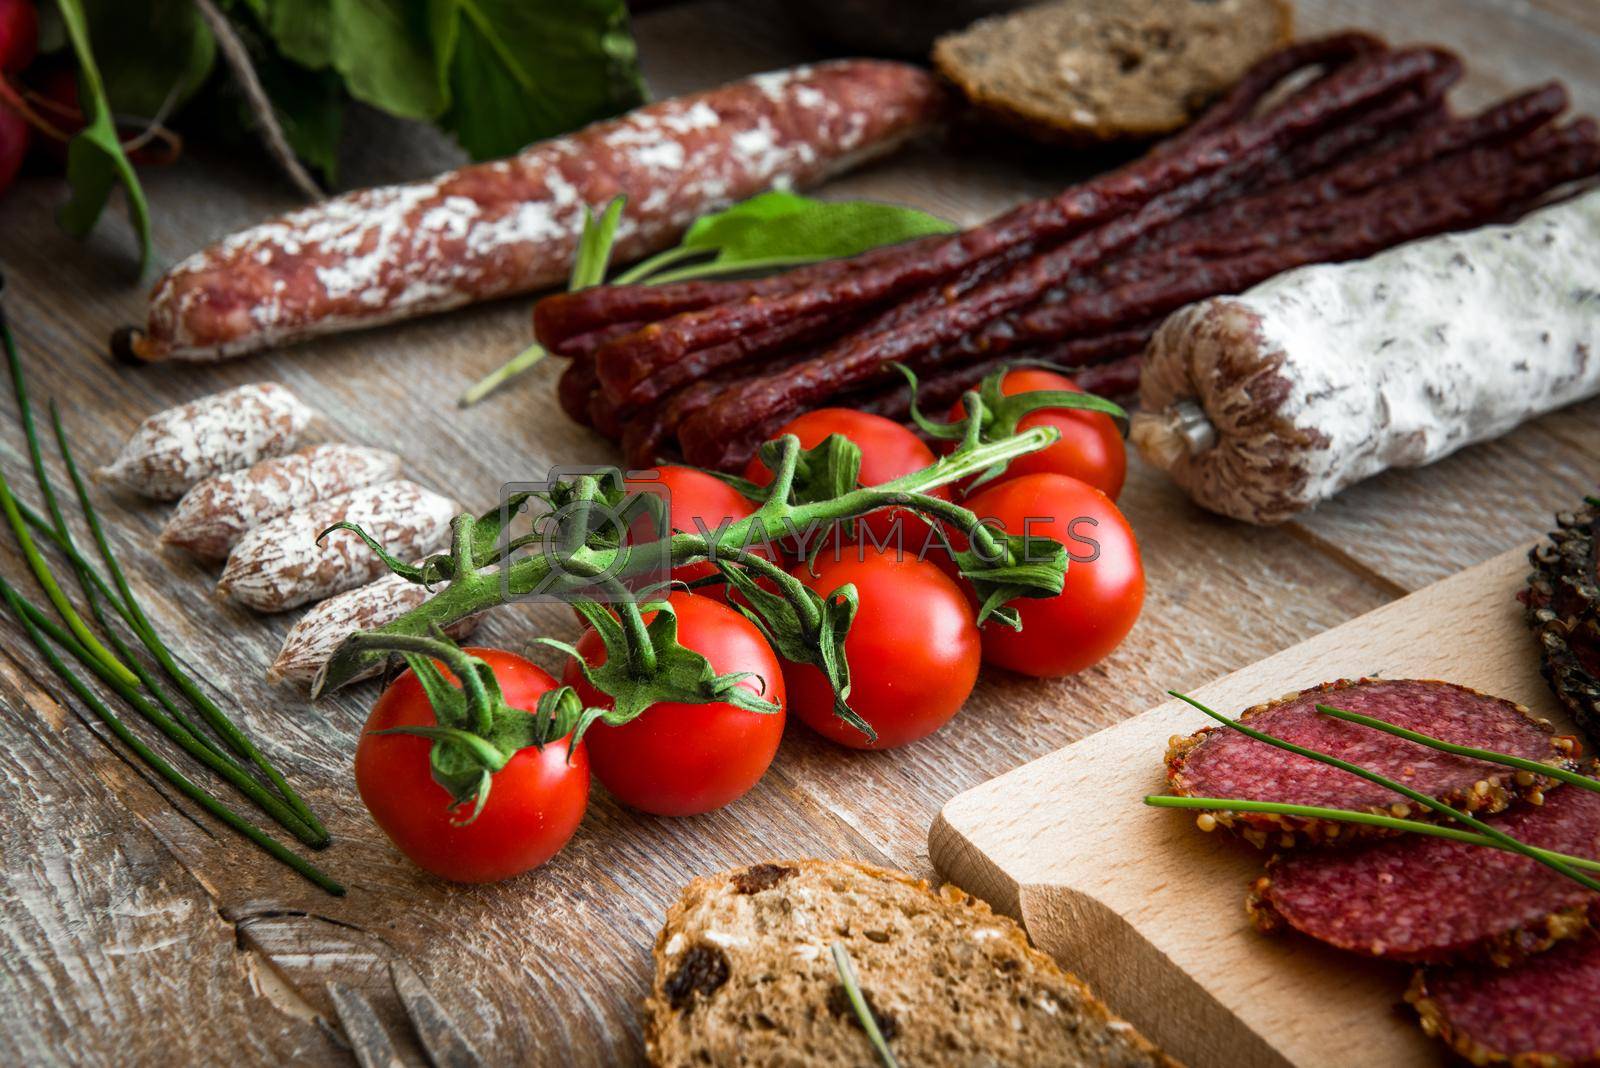 Royalty free image of bunch of cherry tomatoes with salami sausages by GekaSkr